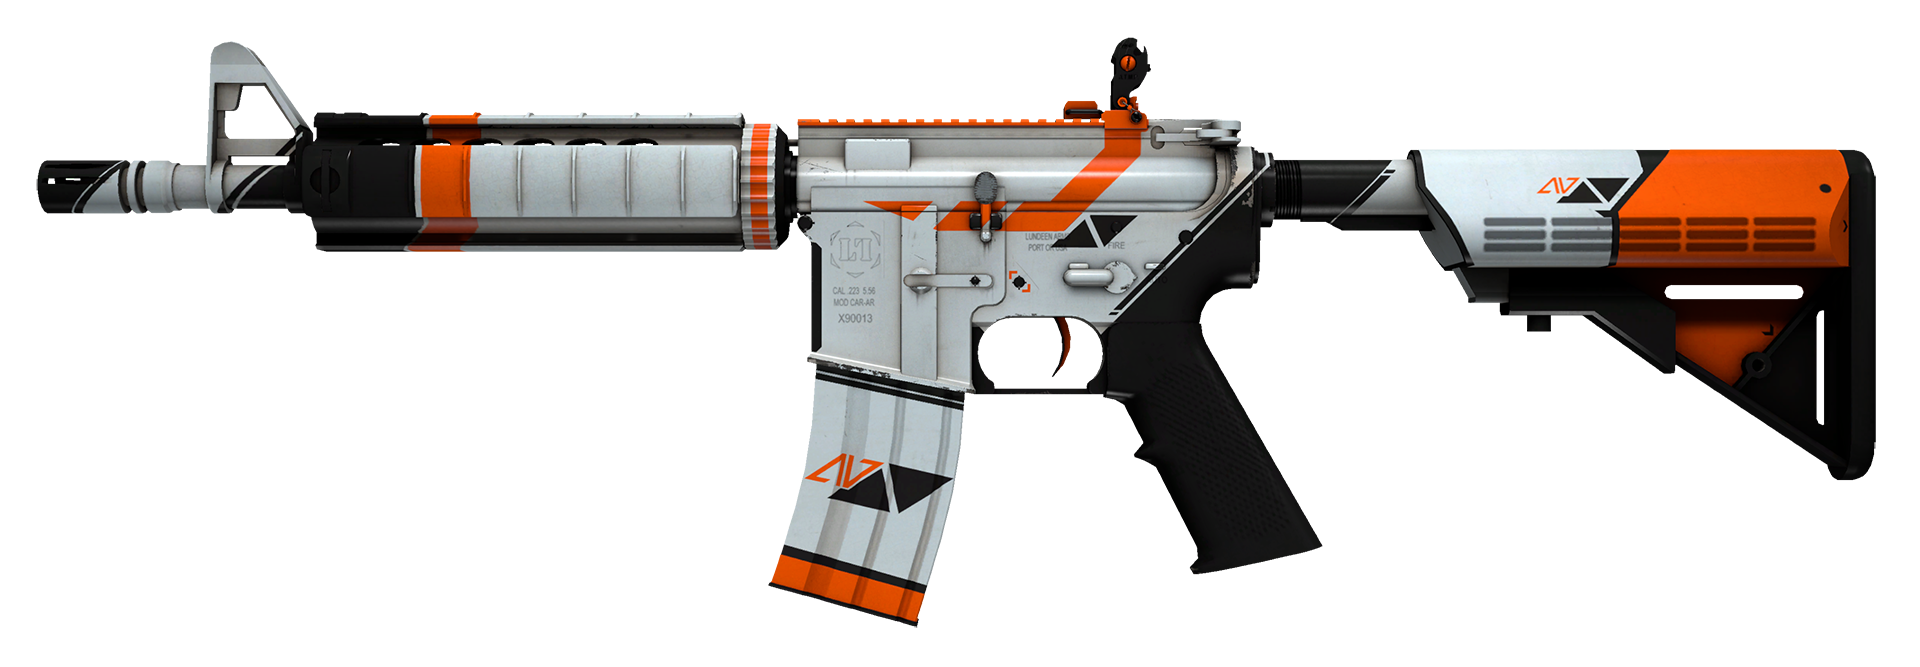 M4A4 Asiimov Large Rendering